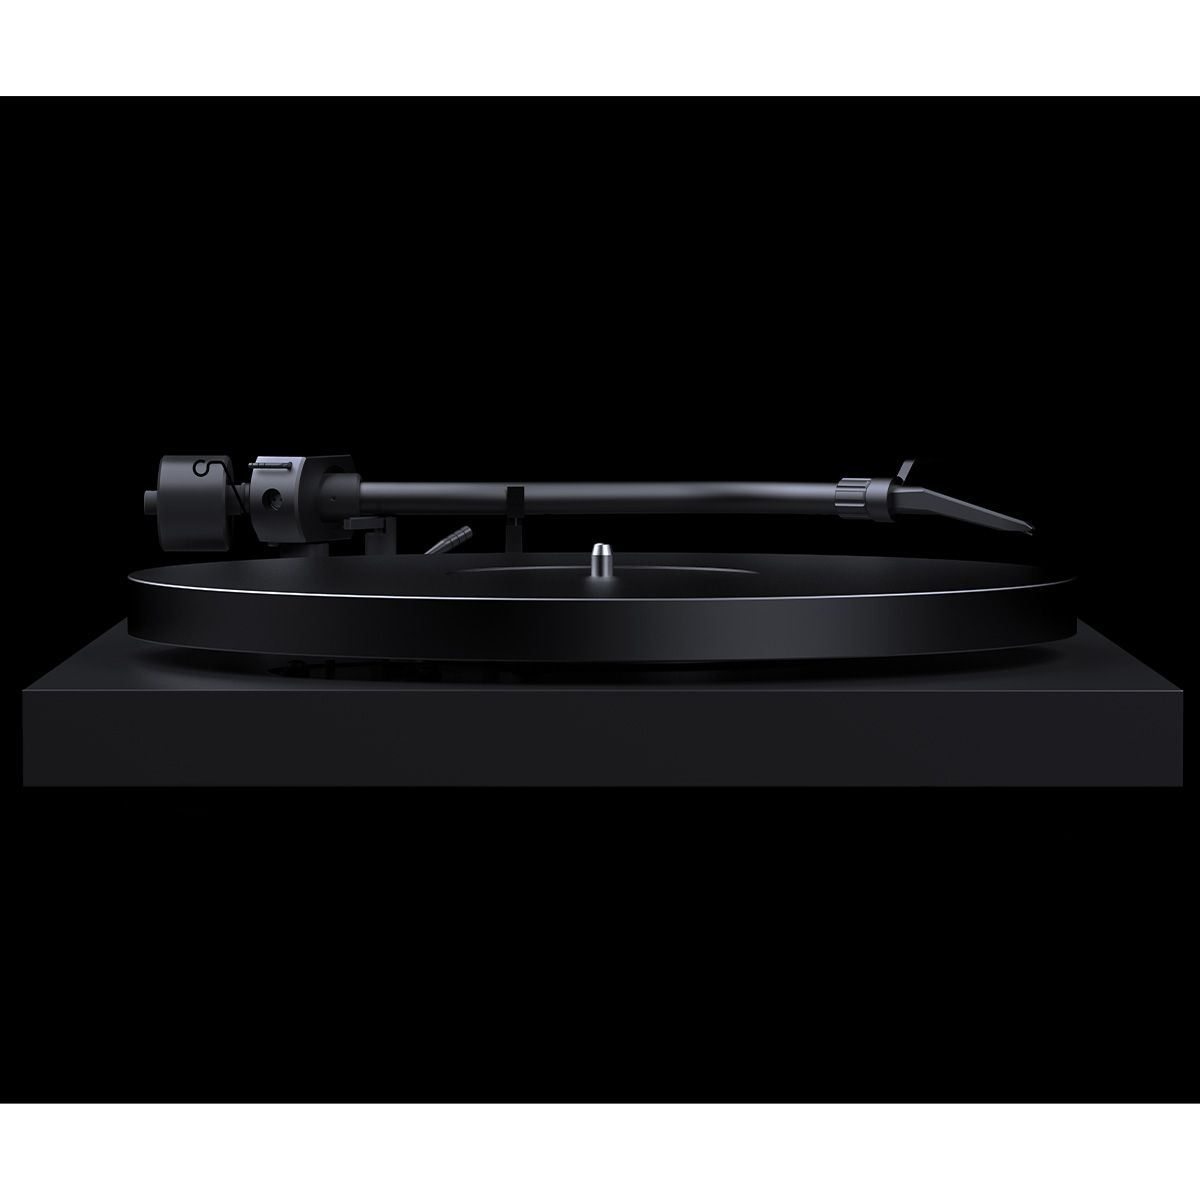 Side view Pro-Ject Debut Pro S Turntable in Satin Black on black background showing platter